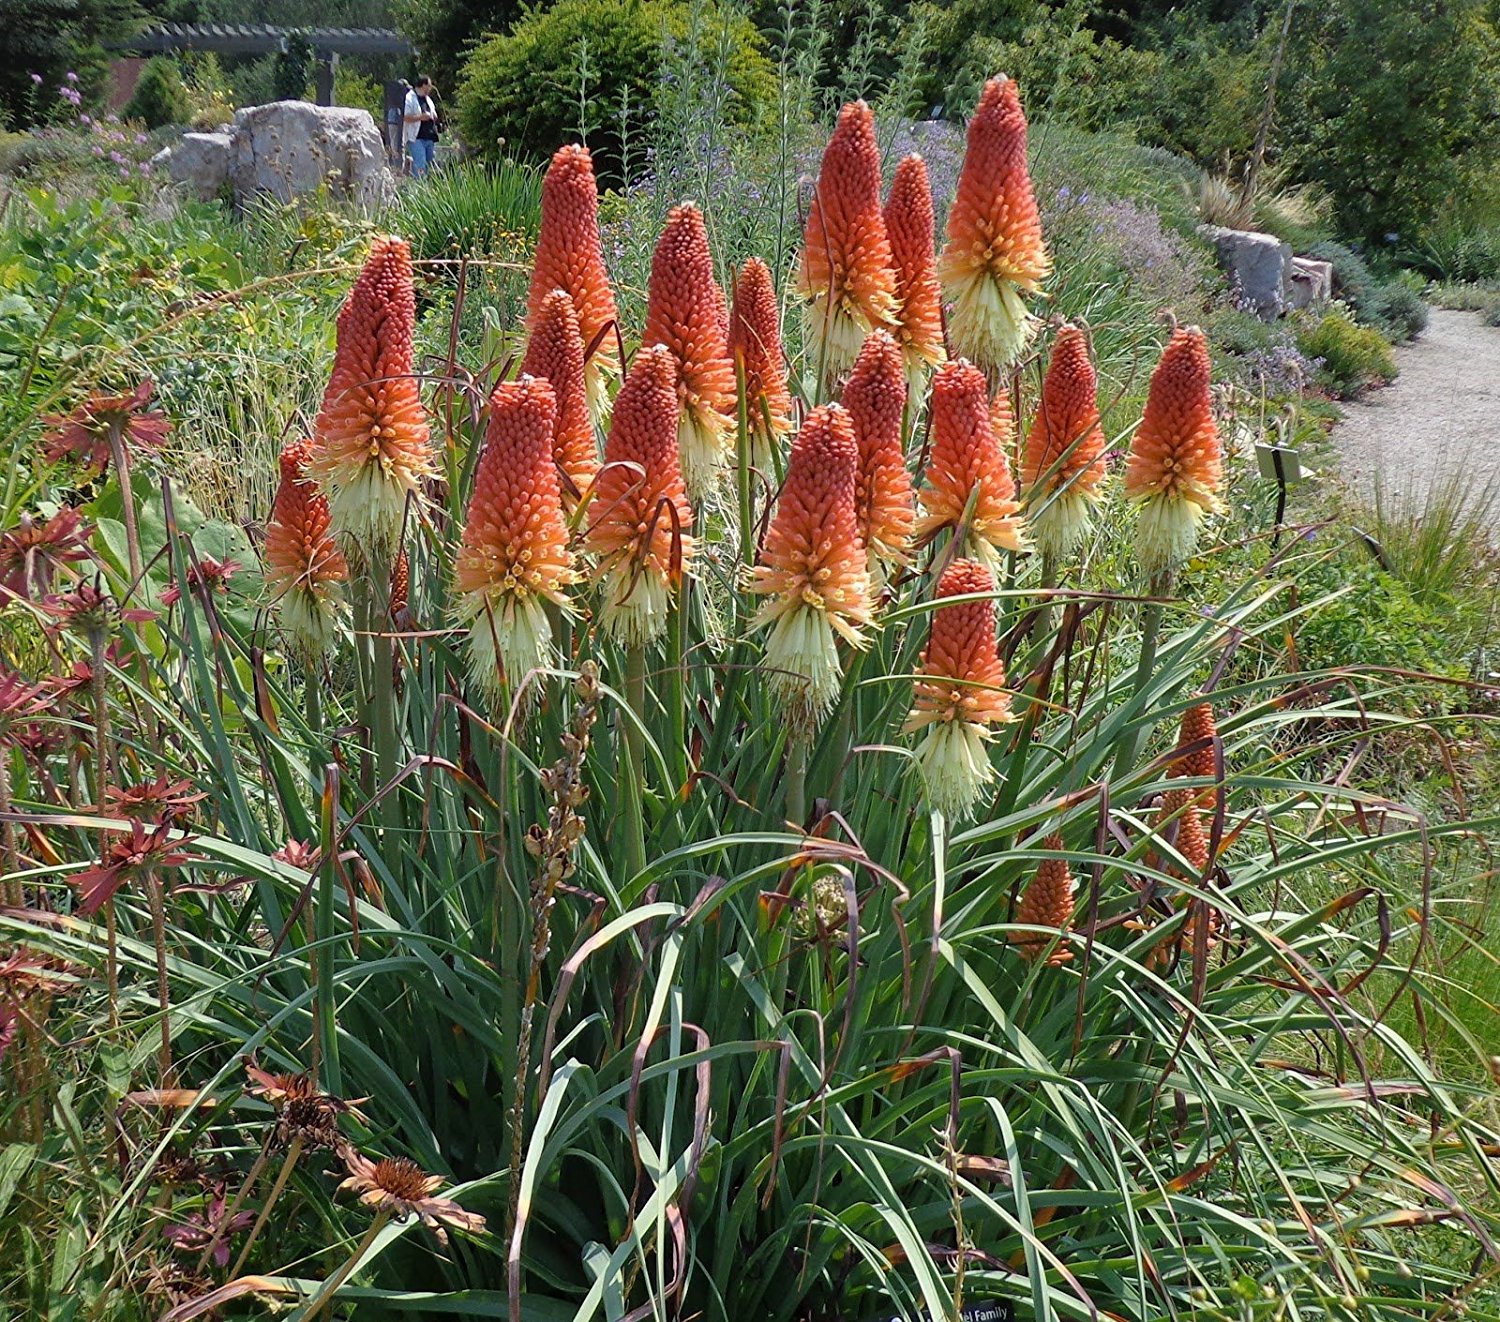 Amazon.com : Kniphofia Torch Lily Red Hot Poker Tritoma Flower ...